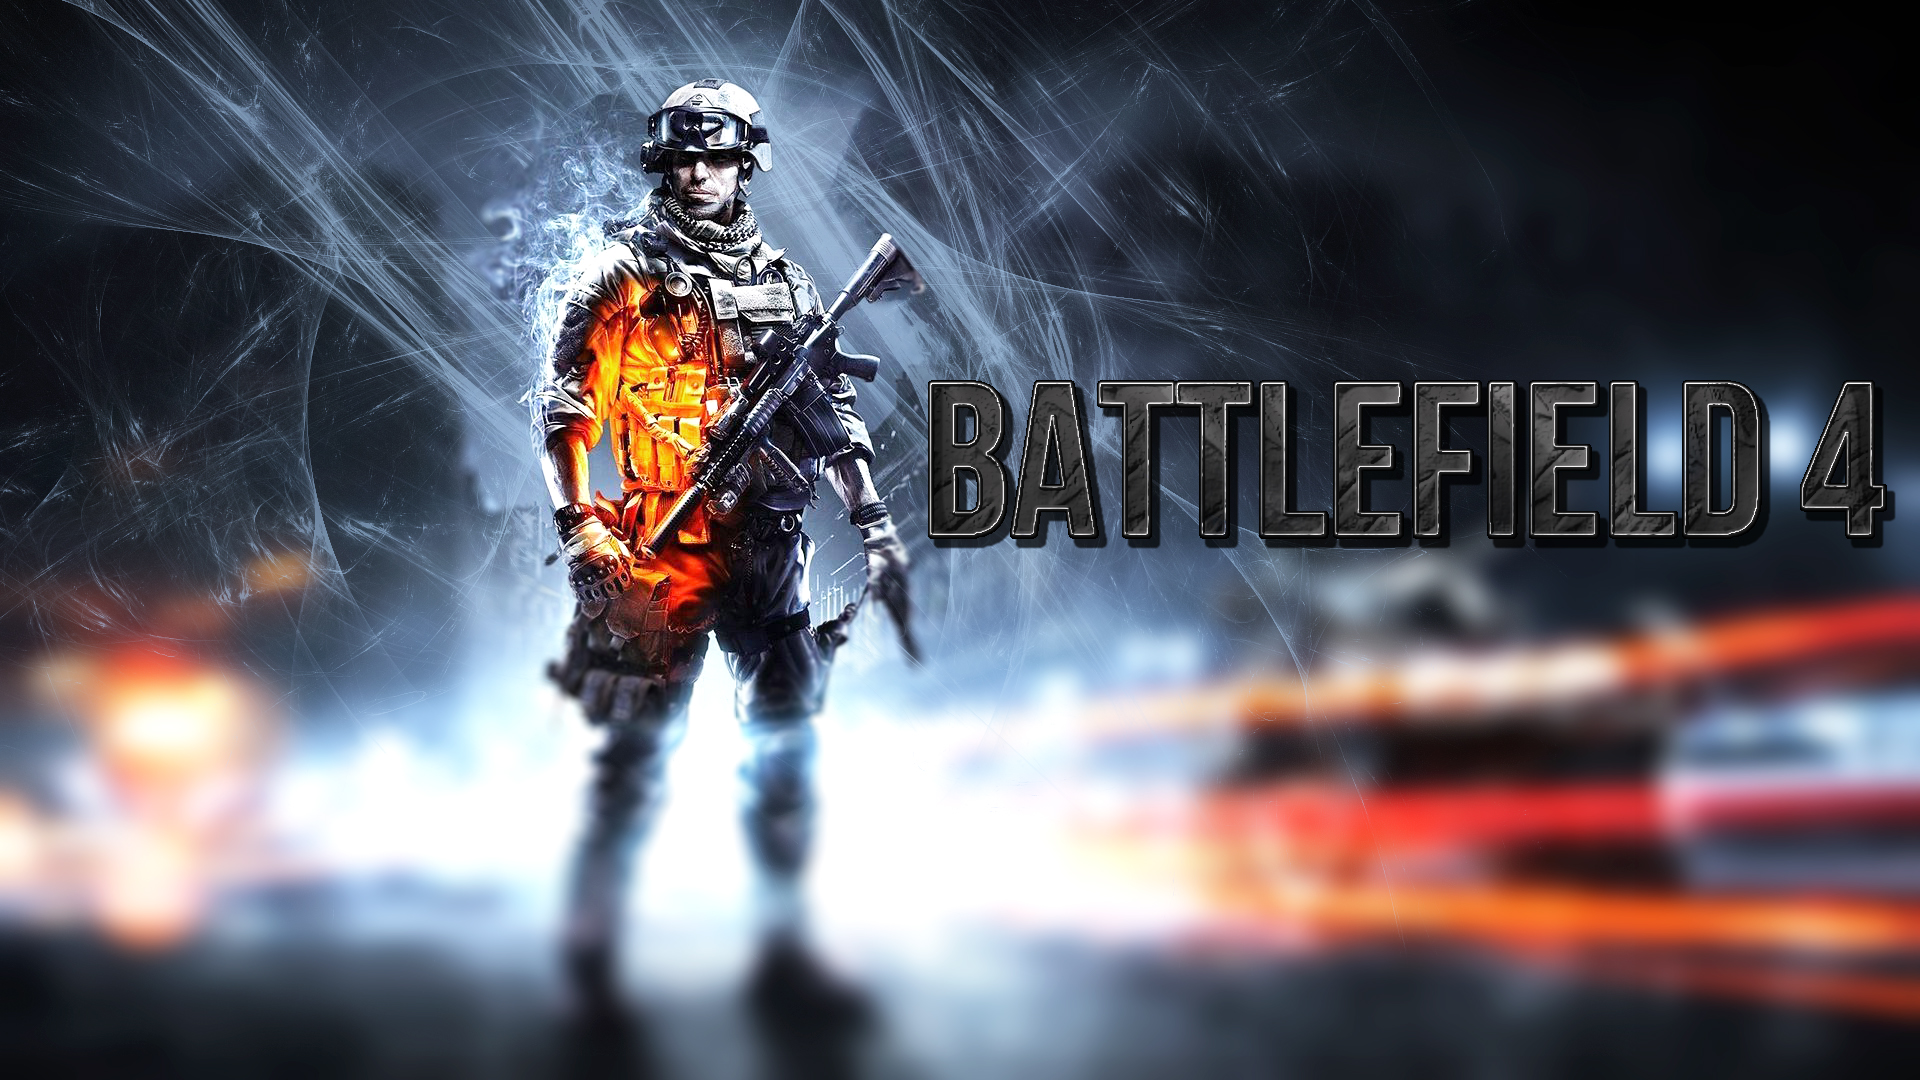 Free Download Bf4 Large Graphic Taw The Art Of Warfare Premier Online Gaming 19x1080 For Your Desktop Mobile Tablet Explore 43 Hd Bf4 Wallpaper Battlefield 4 1080p Wallpaper Bf4 Wallpaper